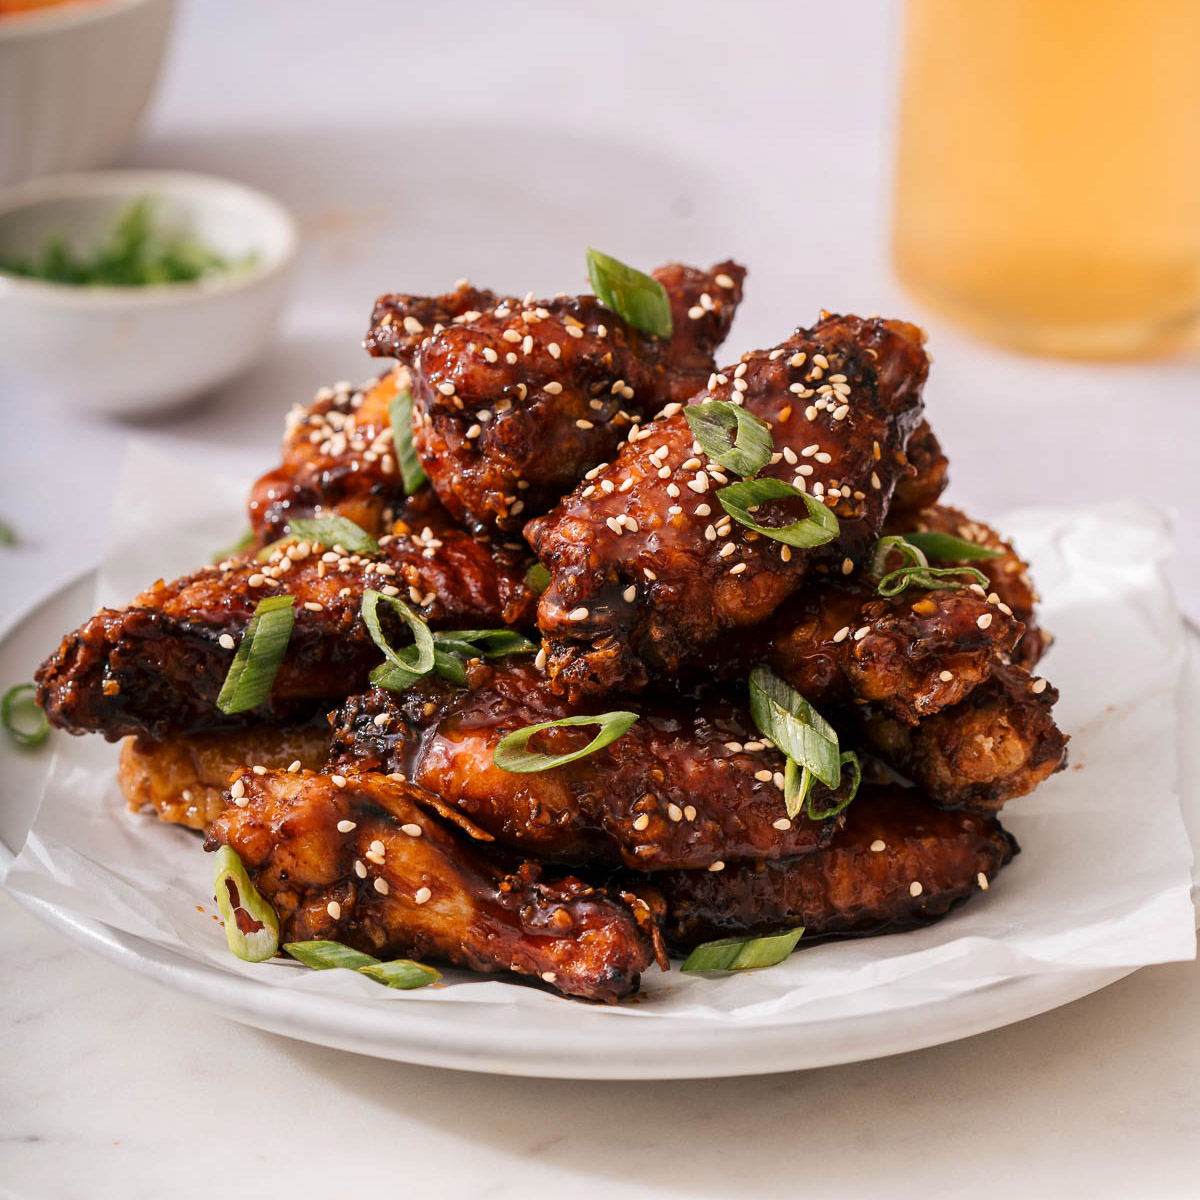 Up close with a plate of soy garlic chicken wings garnished wit sesame seeds and green onion.